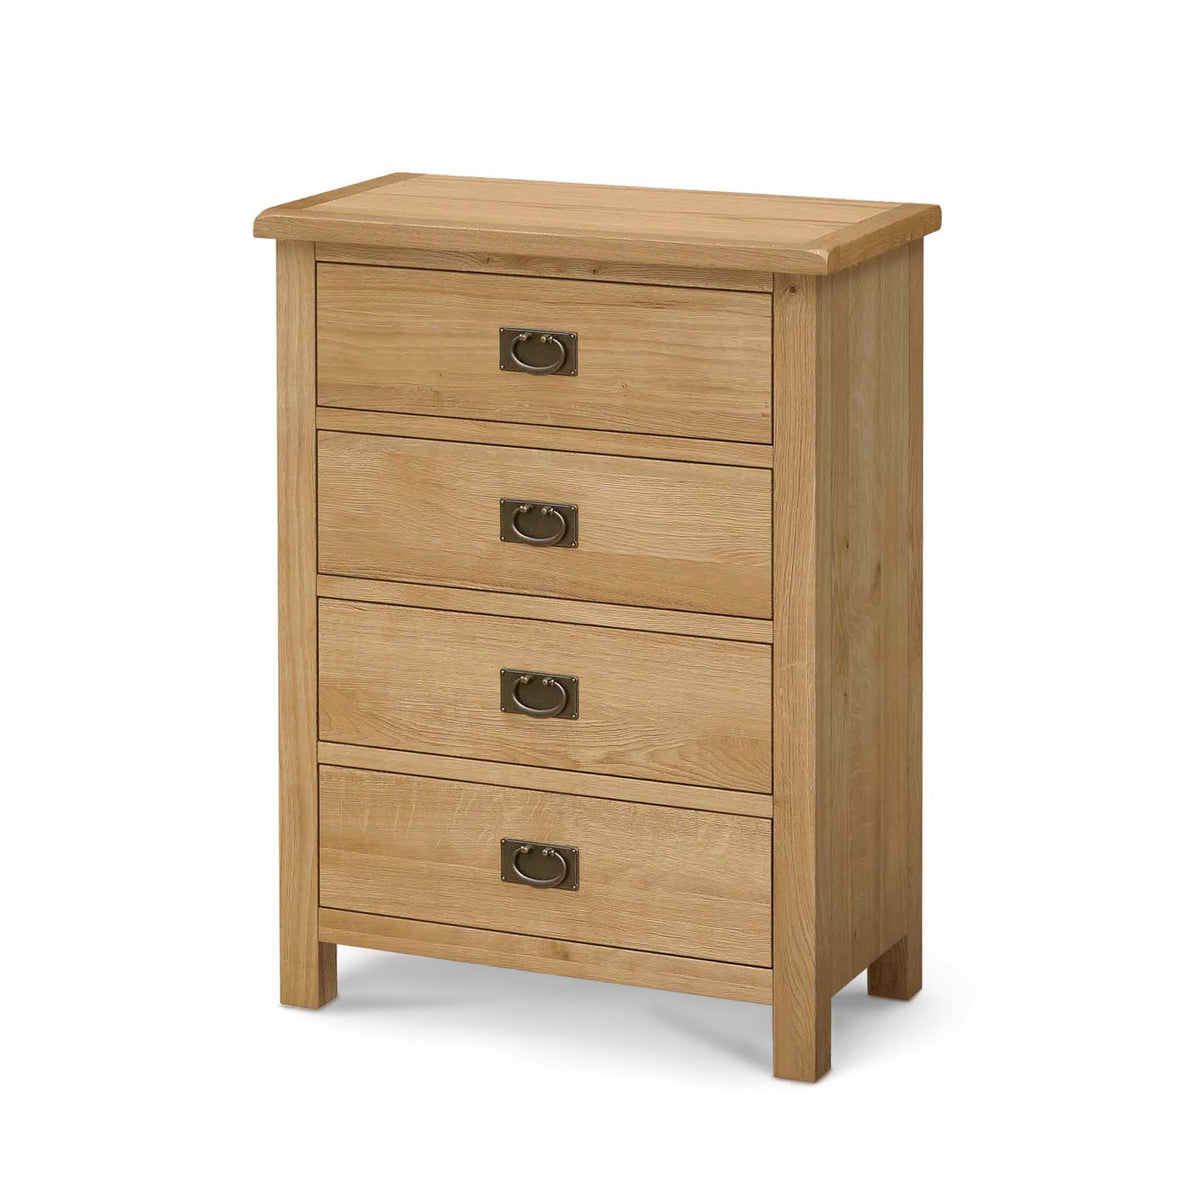 Surrey Oak waxed 4 drawer chest of drawers